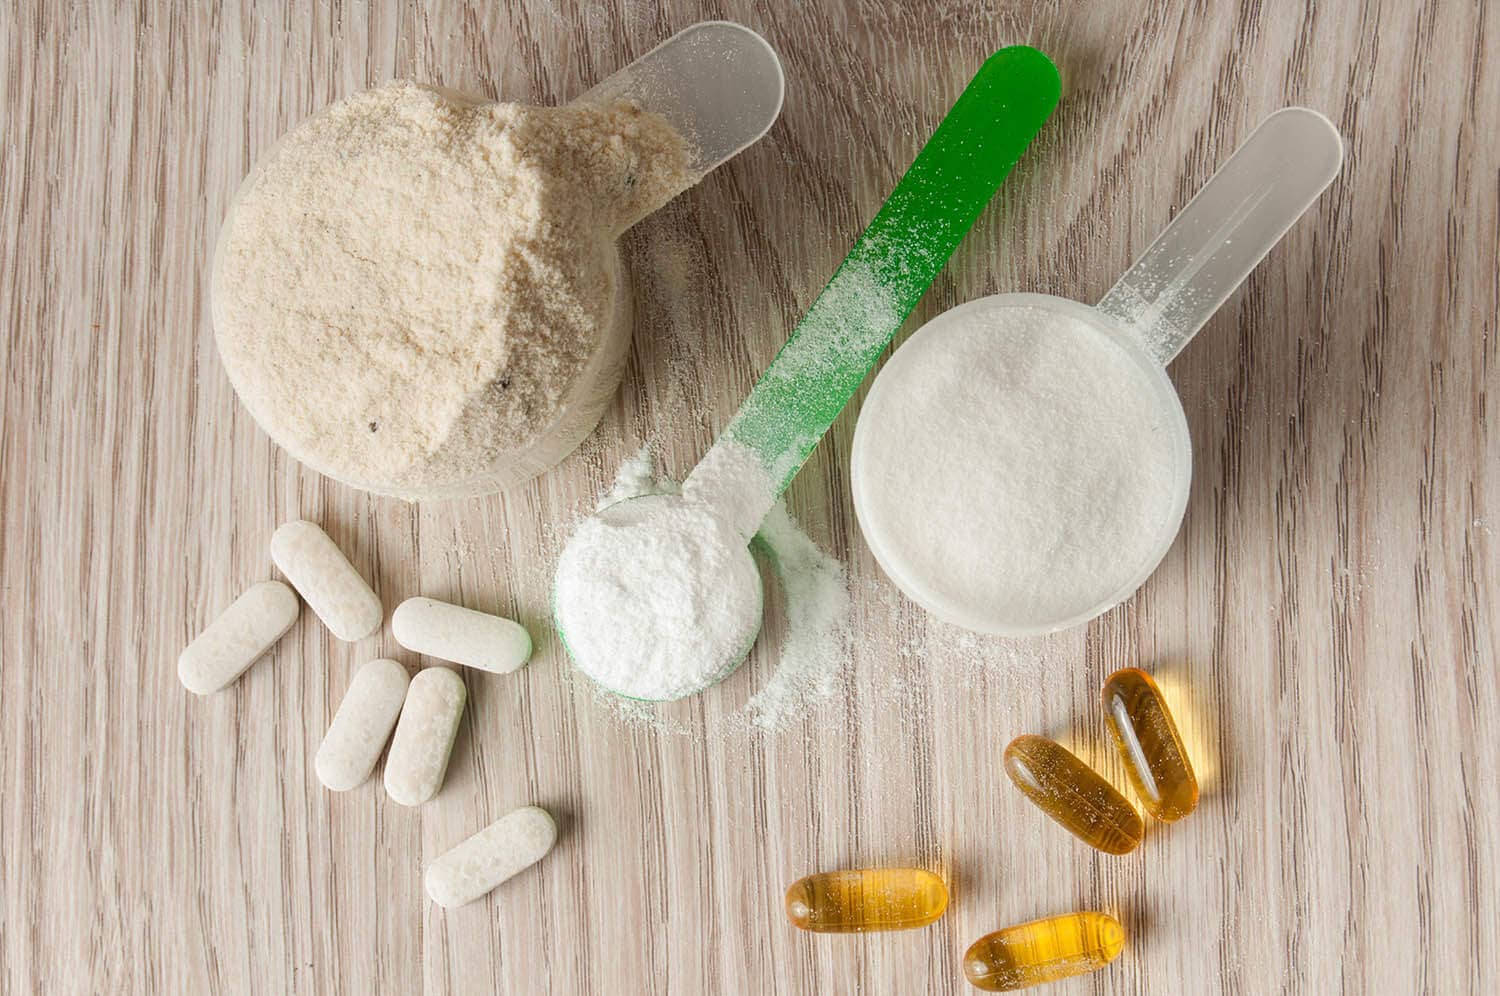 The Best Supplements for Homemade Pre-Workout Drink DIY